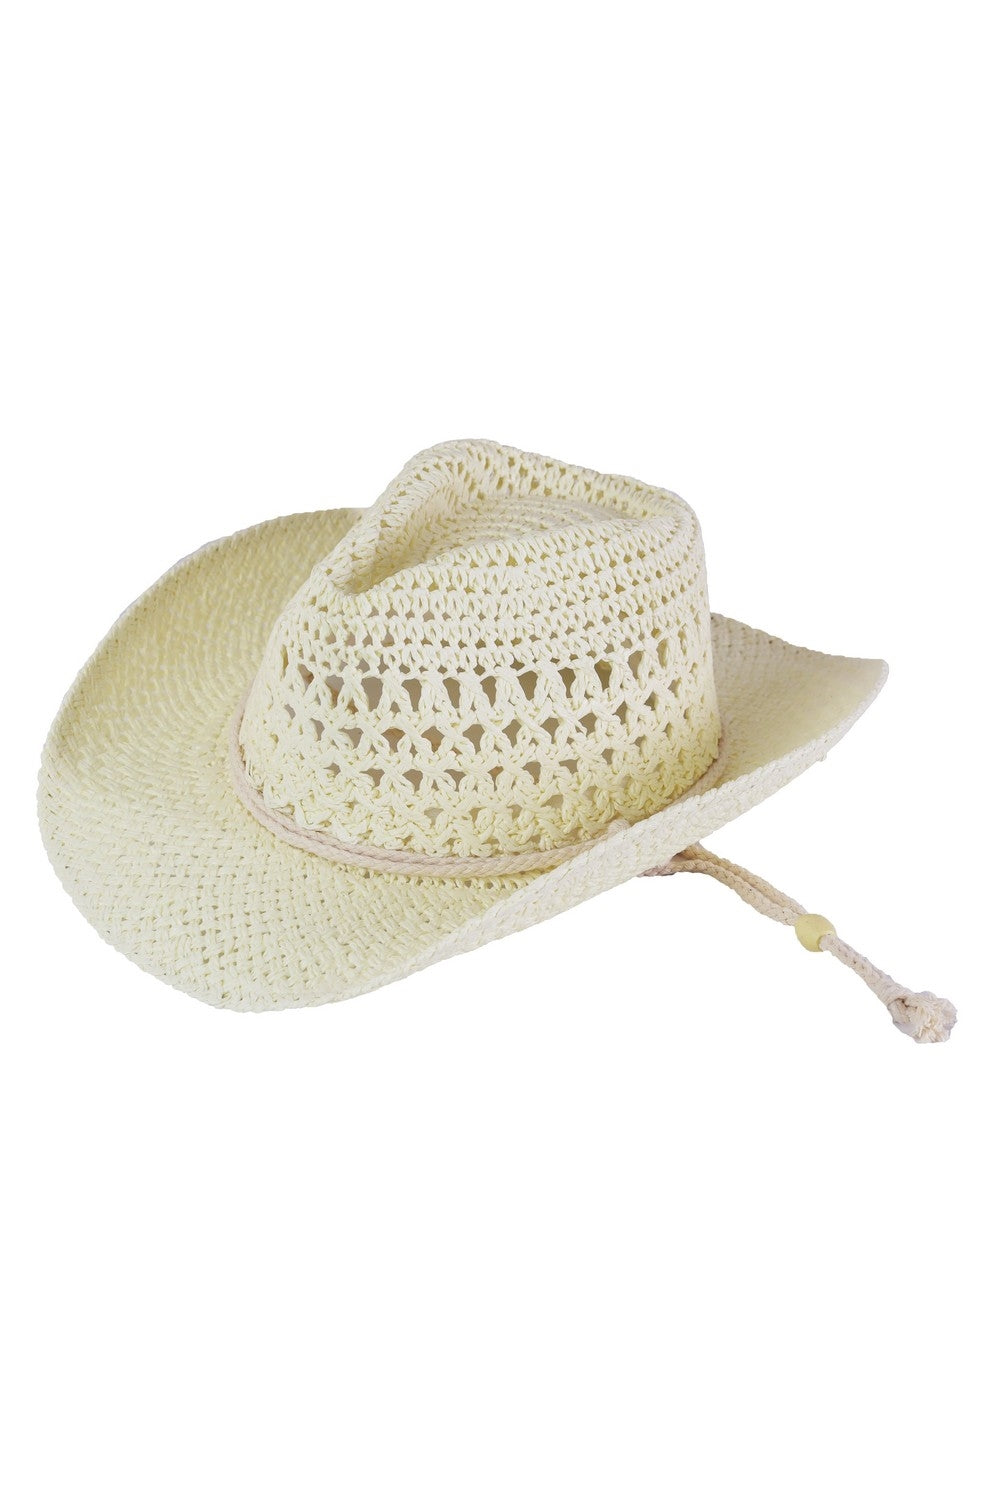 Straw Cowboy Cowgirl Handmade Hat with Chin Strap Ivory - Pack of 6